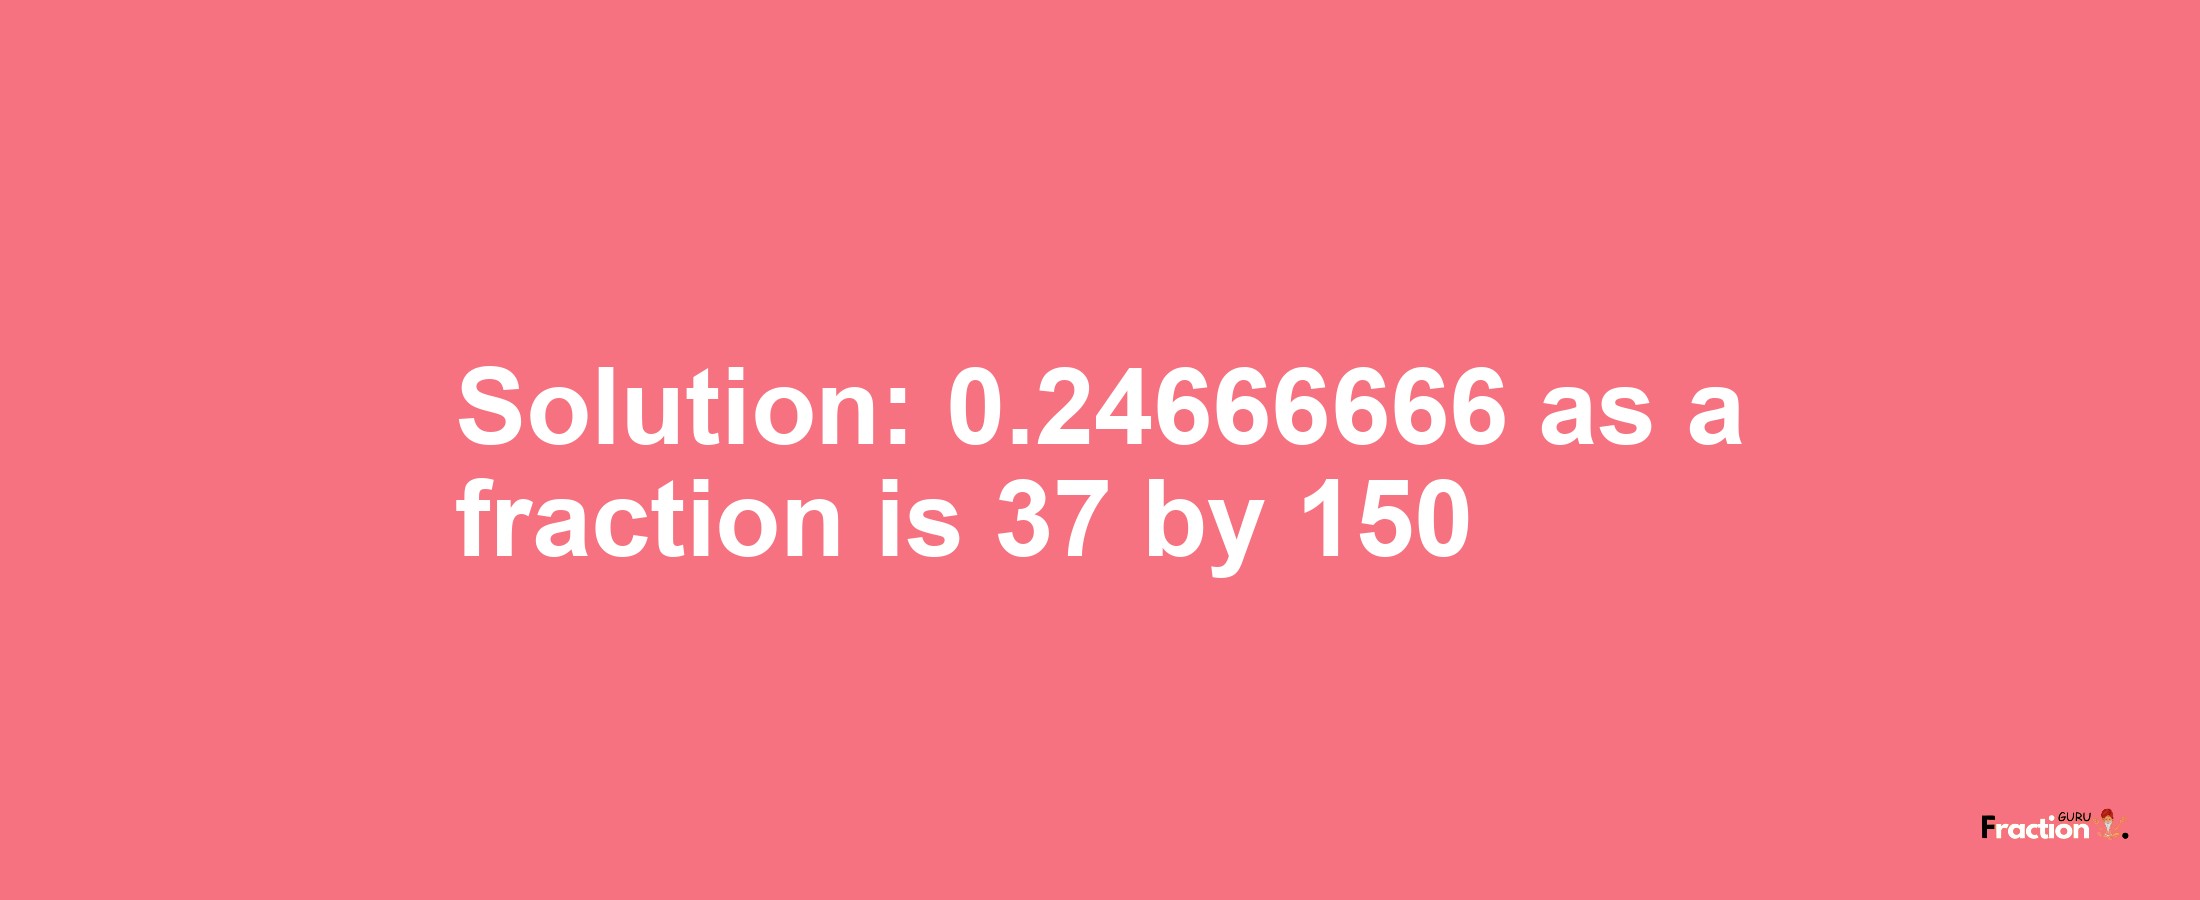 Solution:0.24666666 as a fraction is 37/150